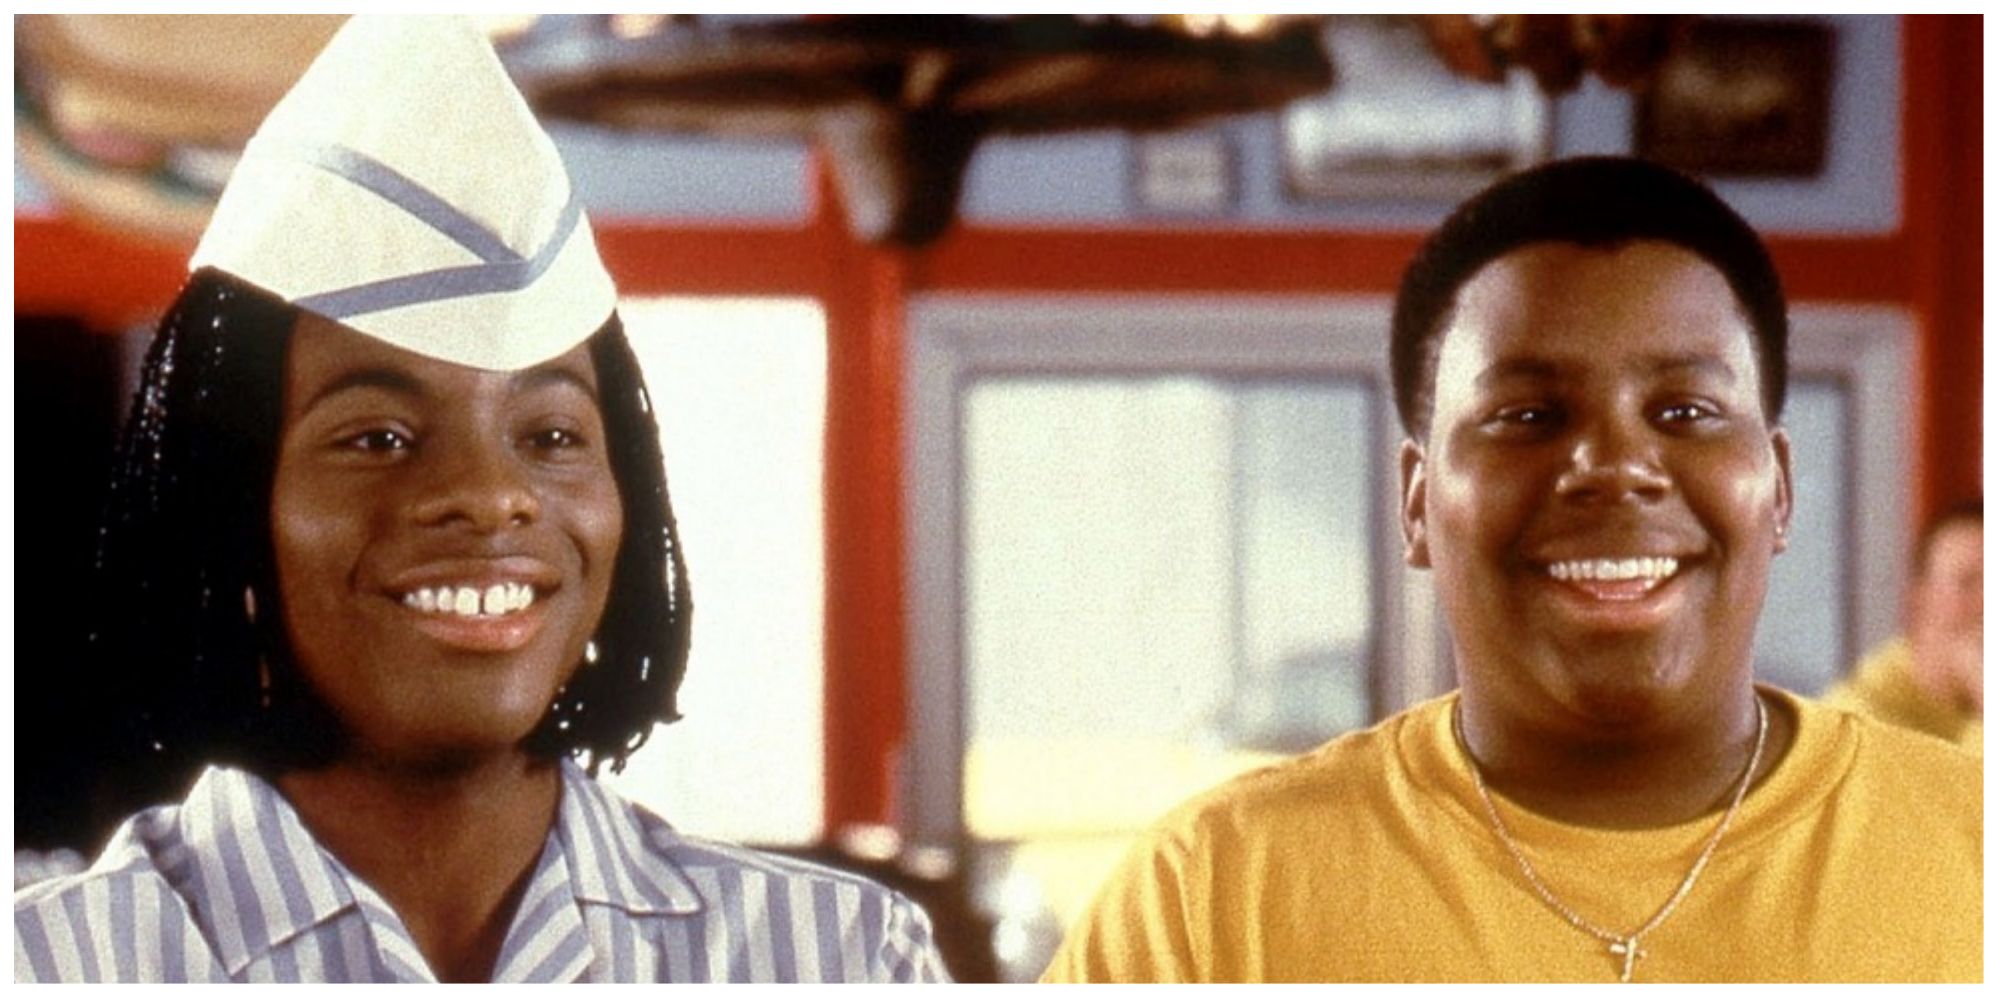 Kel Mitchell and Kenan Thompson in Good Burger (1997)